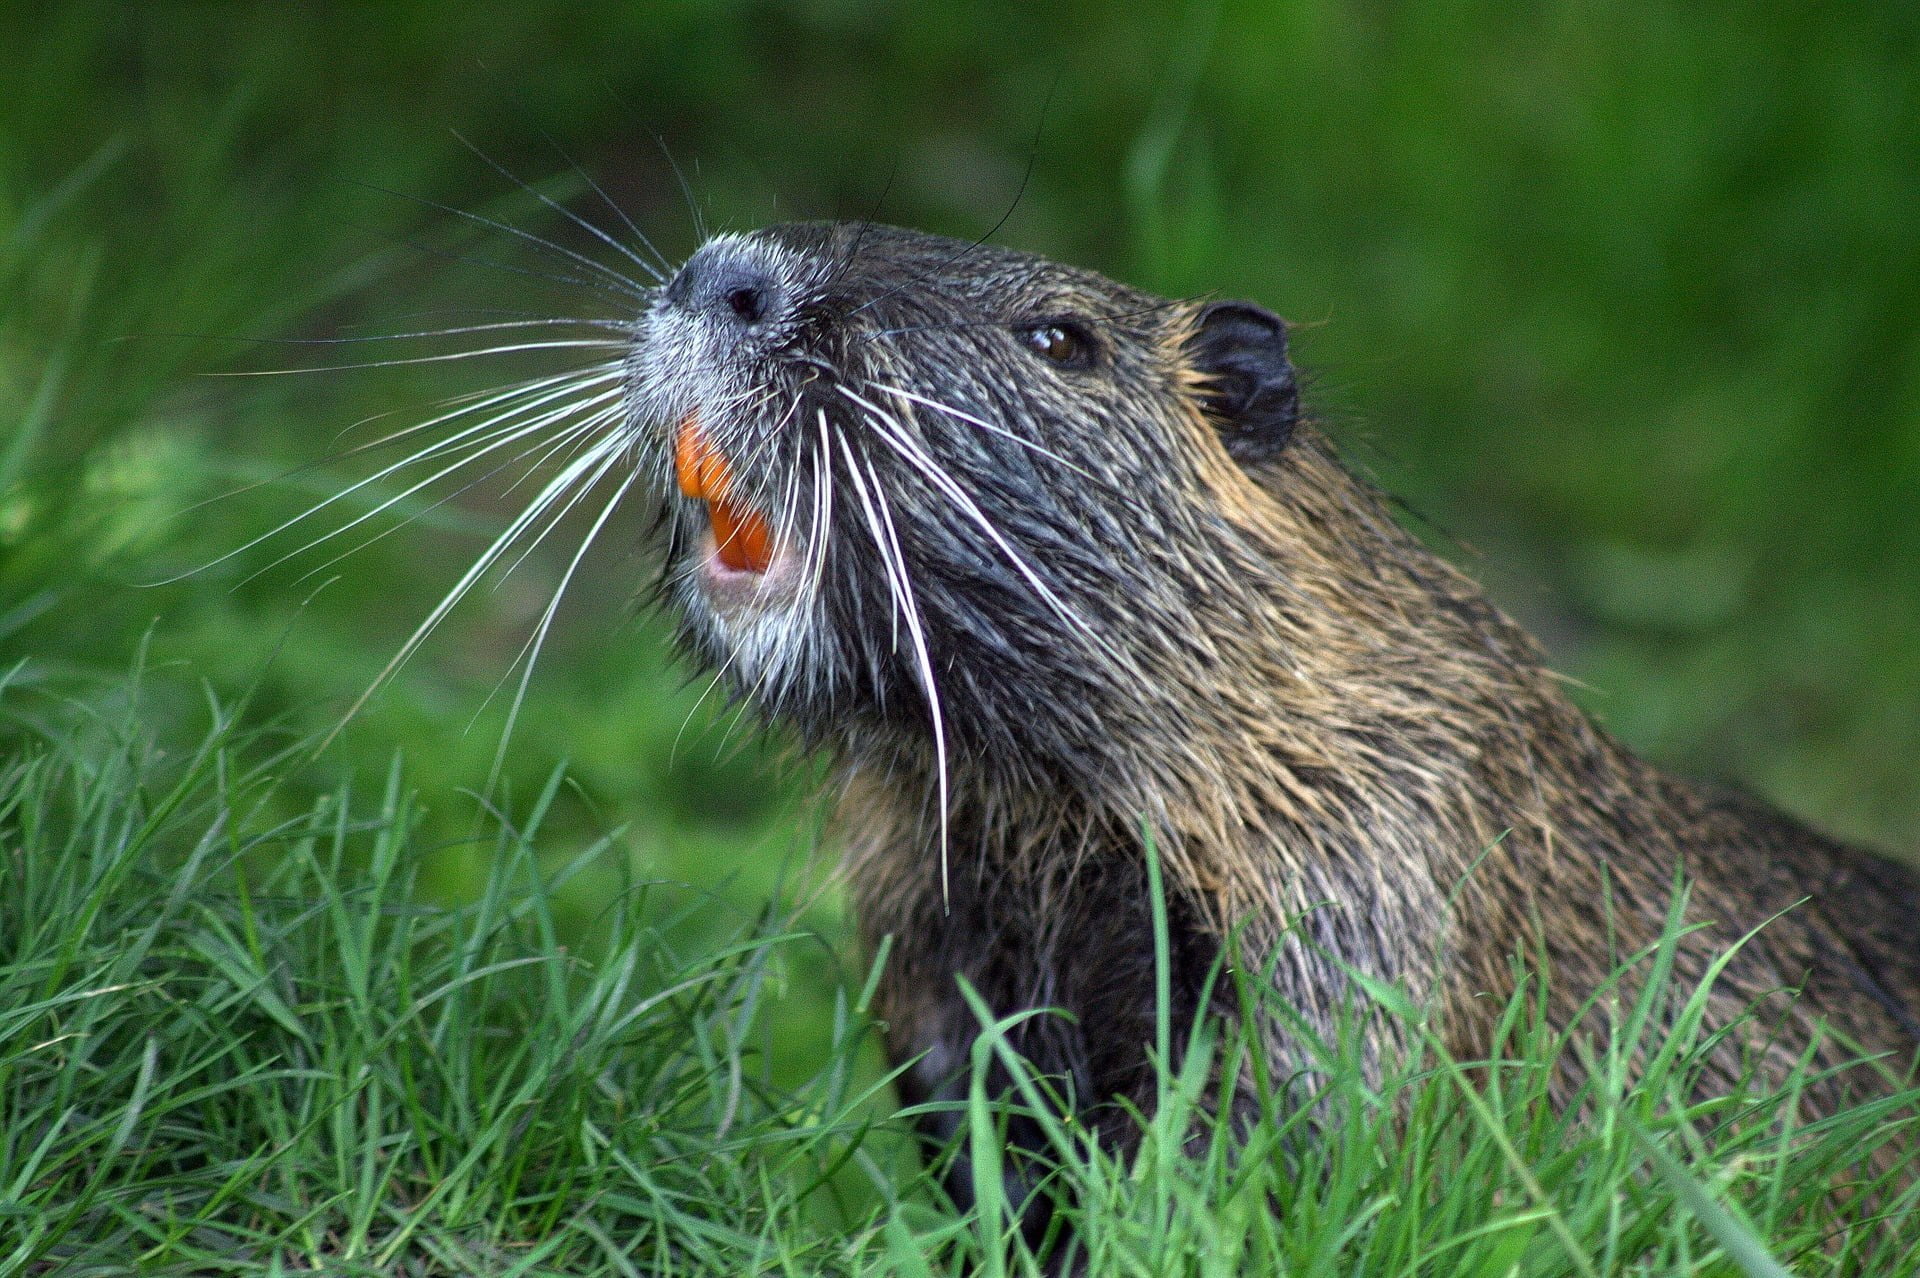 Beavers are helping the environment by building dams and creating wetlands. Image of a beaver with orange teeth.